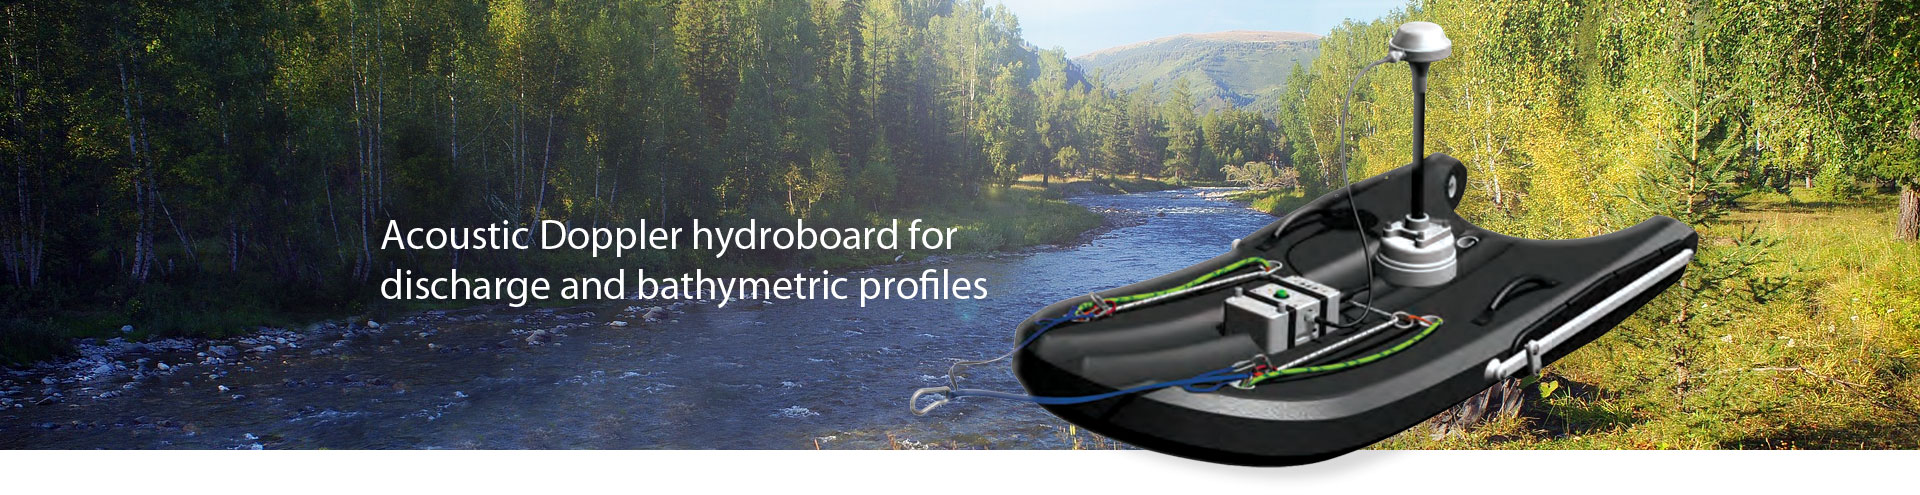 Acoustic Doppler hydroboard for discharge and bathymetric profiles